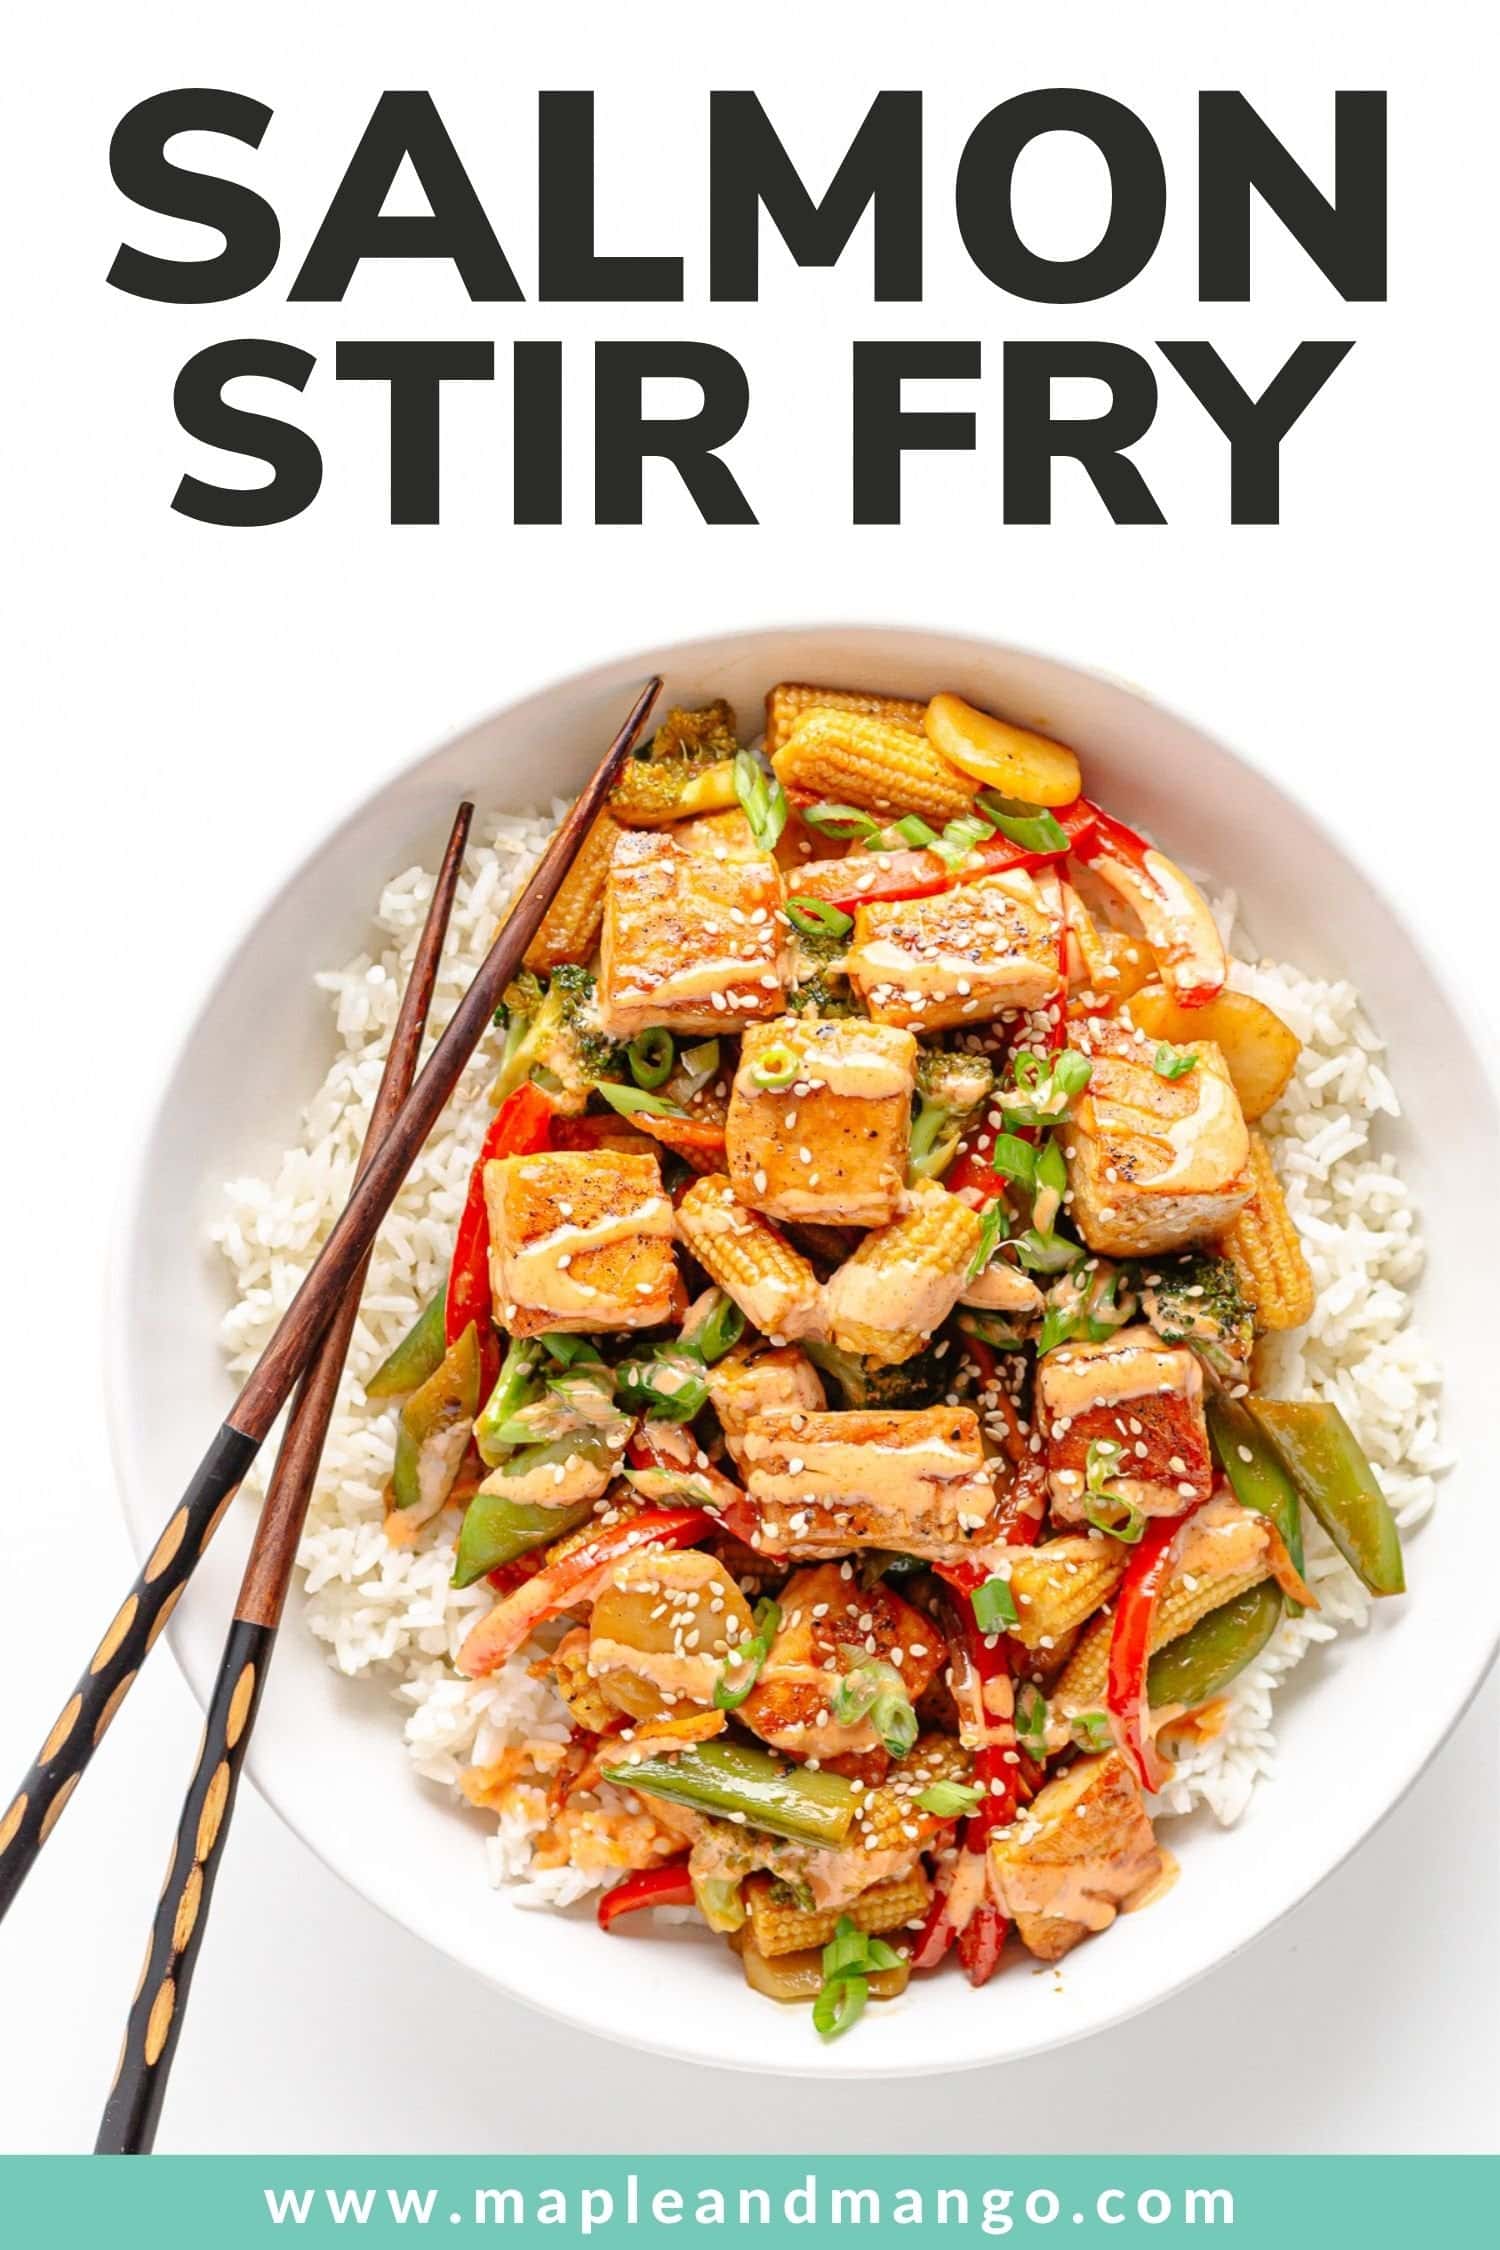 White bowl of stir fry served over rice with chopsticks on the side and text overlay on top that reads "Salmon Stir Fry".